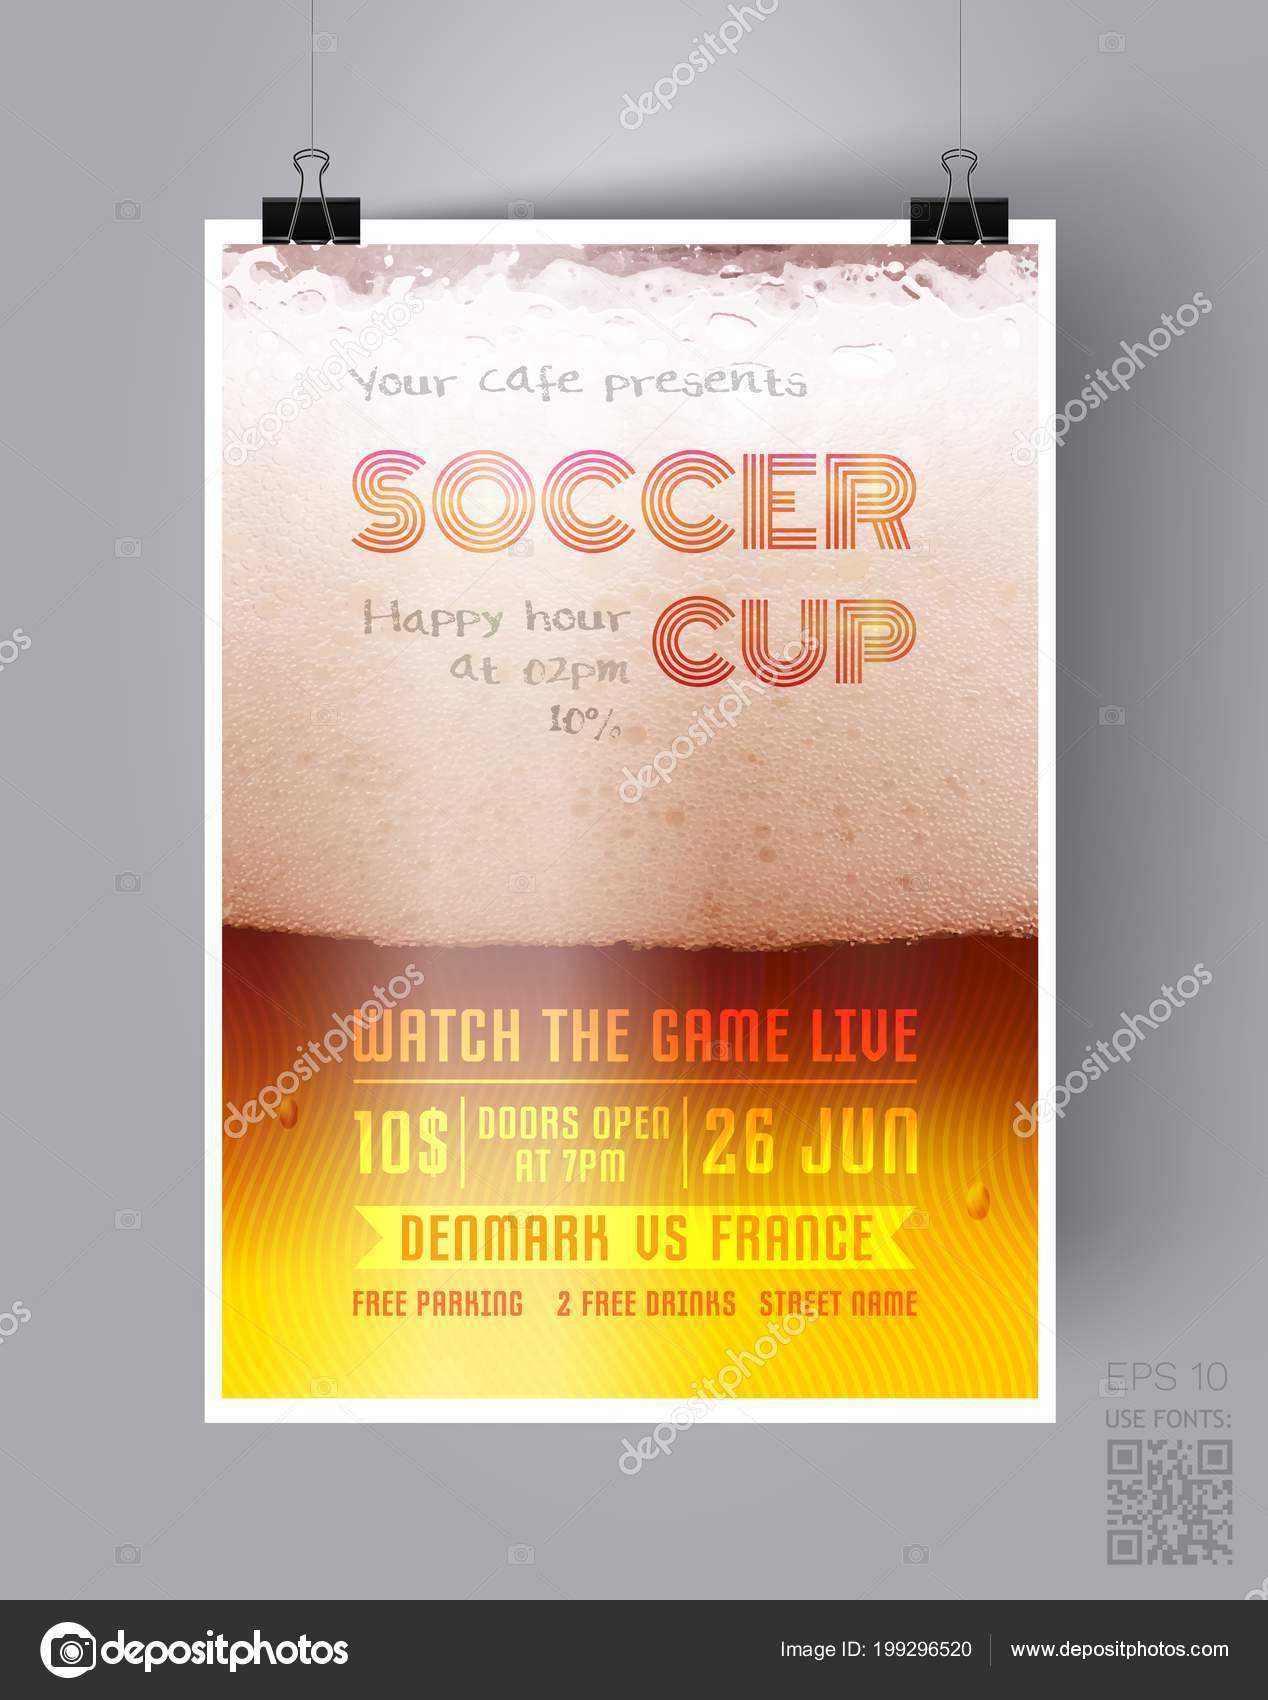 Soccer Cup Flyer Template On The Background Of A Beer Glass Pertaining To Flyer Announcement Template